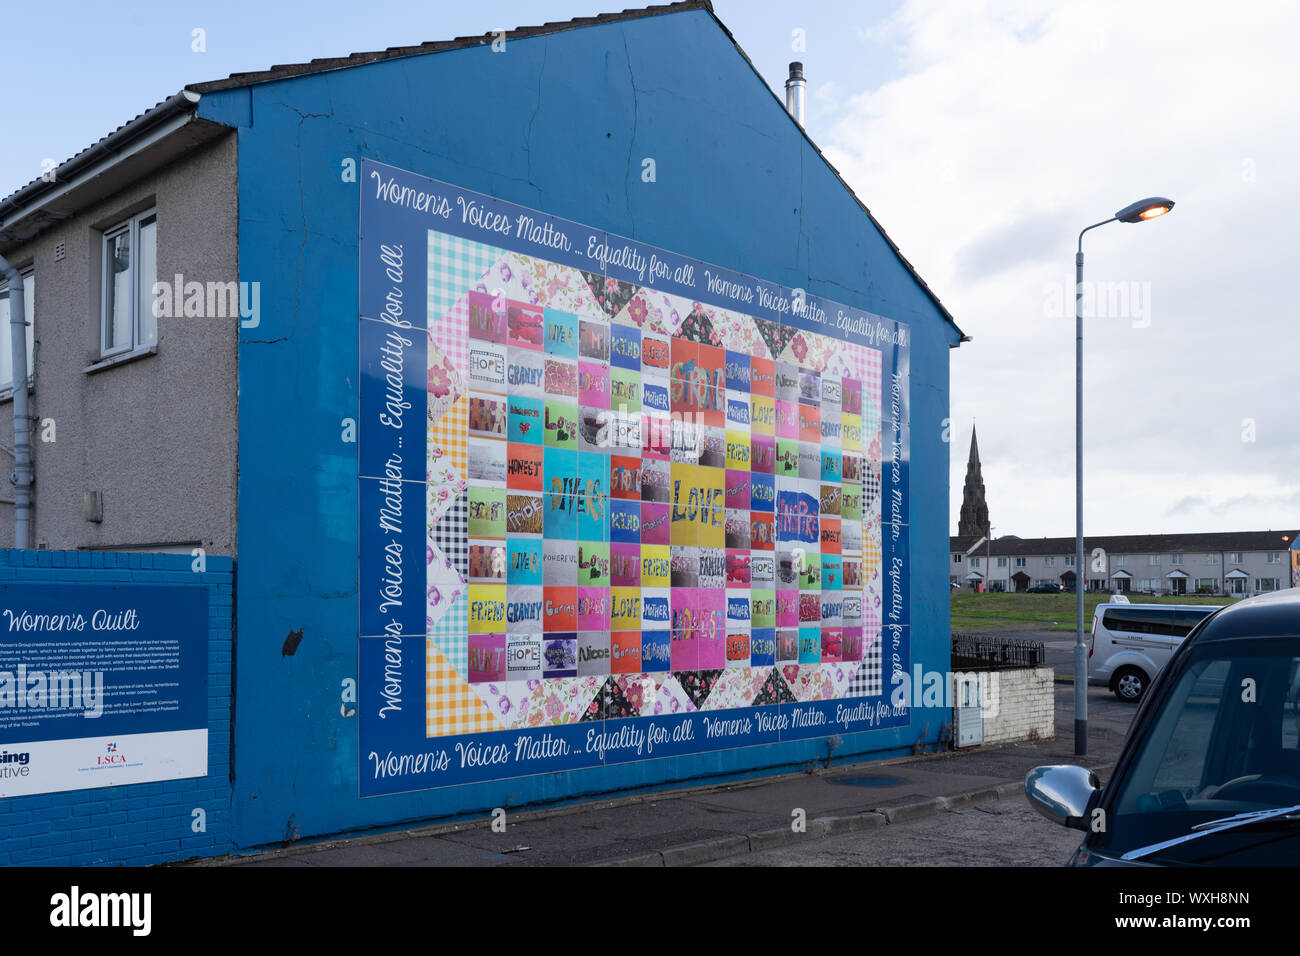 The Women's Quilt created by the Lower Shankhill Women's group on the unionist side of west Belfast. From a series of travel photos in Belfast. Photo Stock Photo